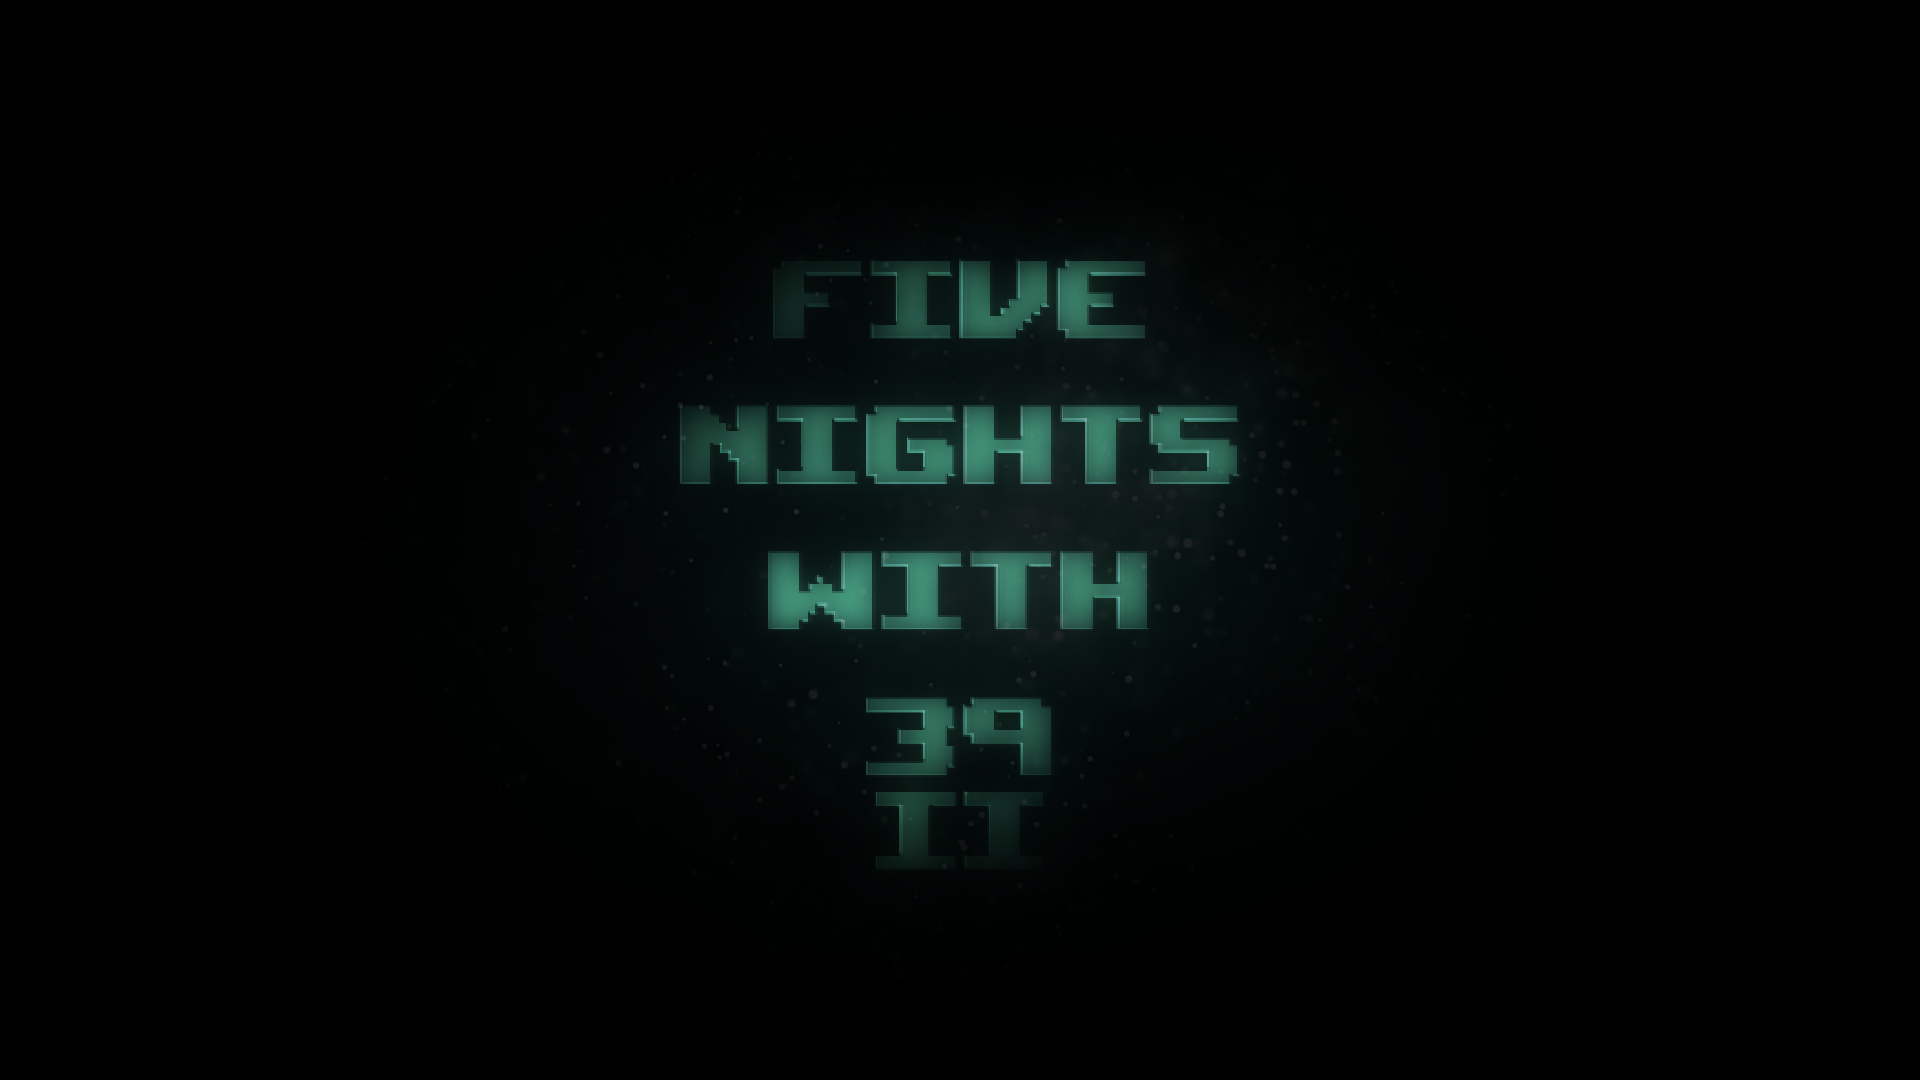 five nights with 39 ending